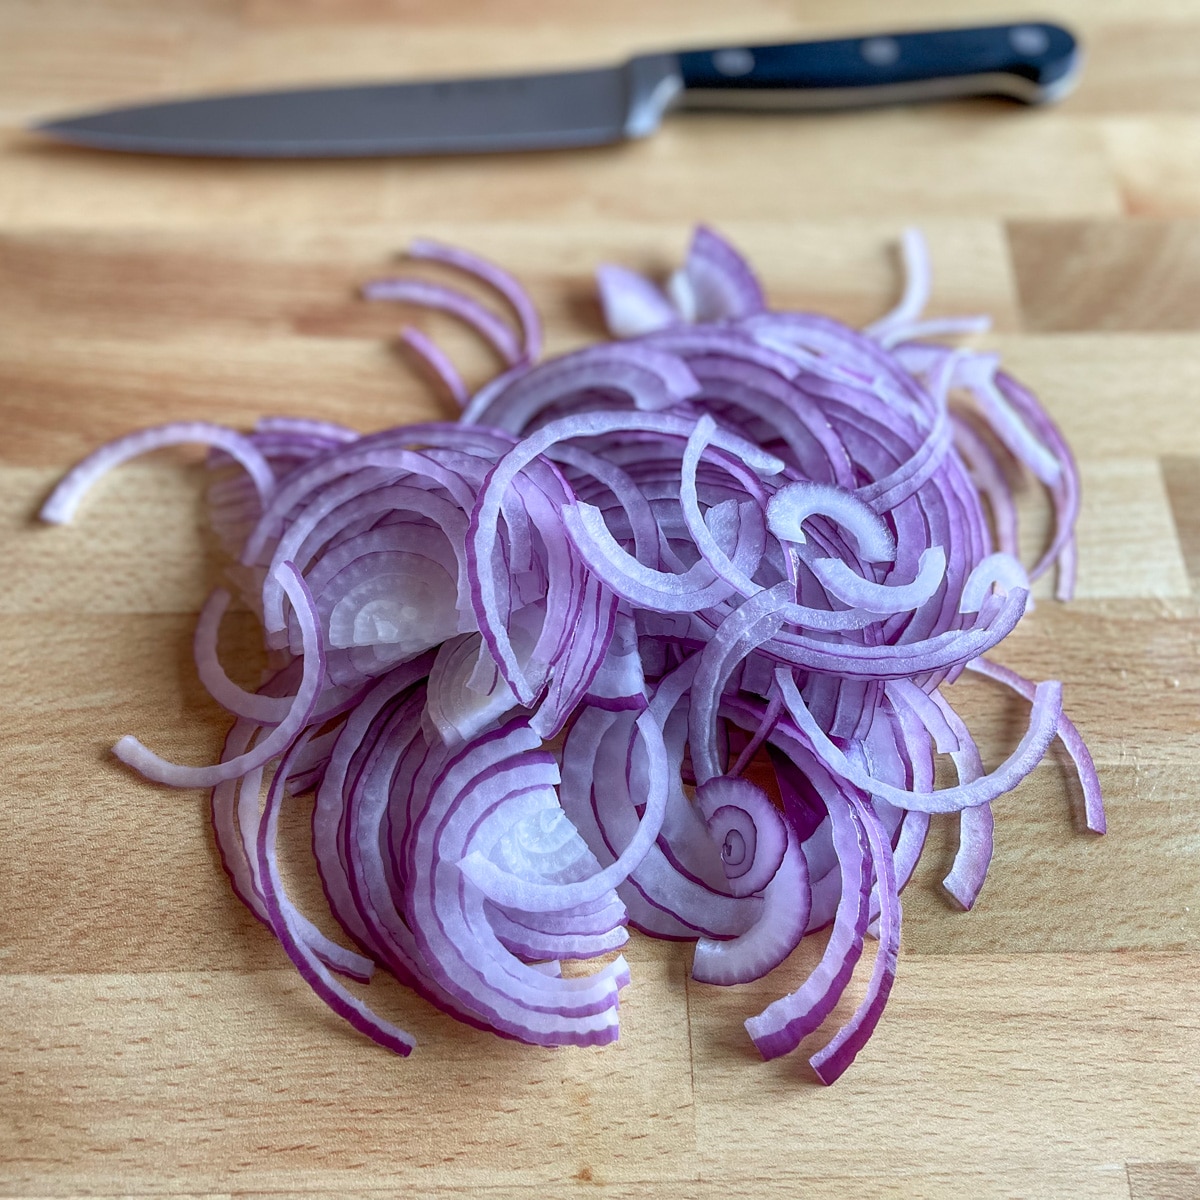 Sliced red onions sit on a wooden cutting board with a kitchen knife in the background.